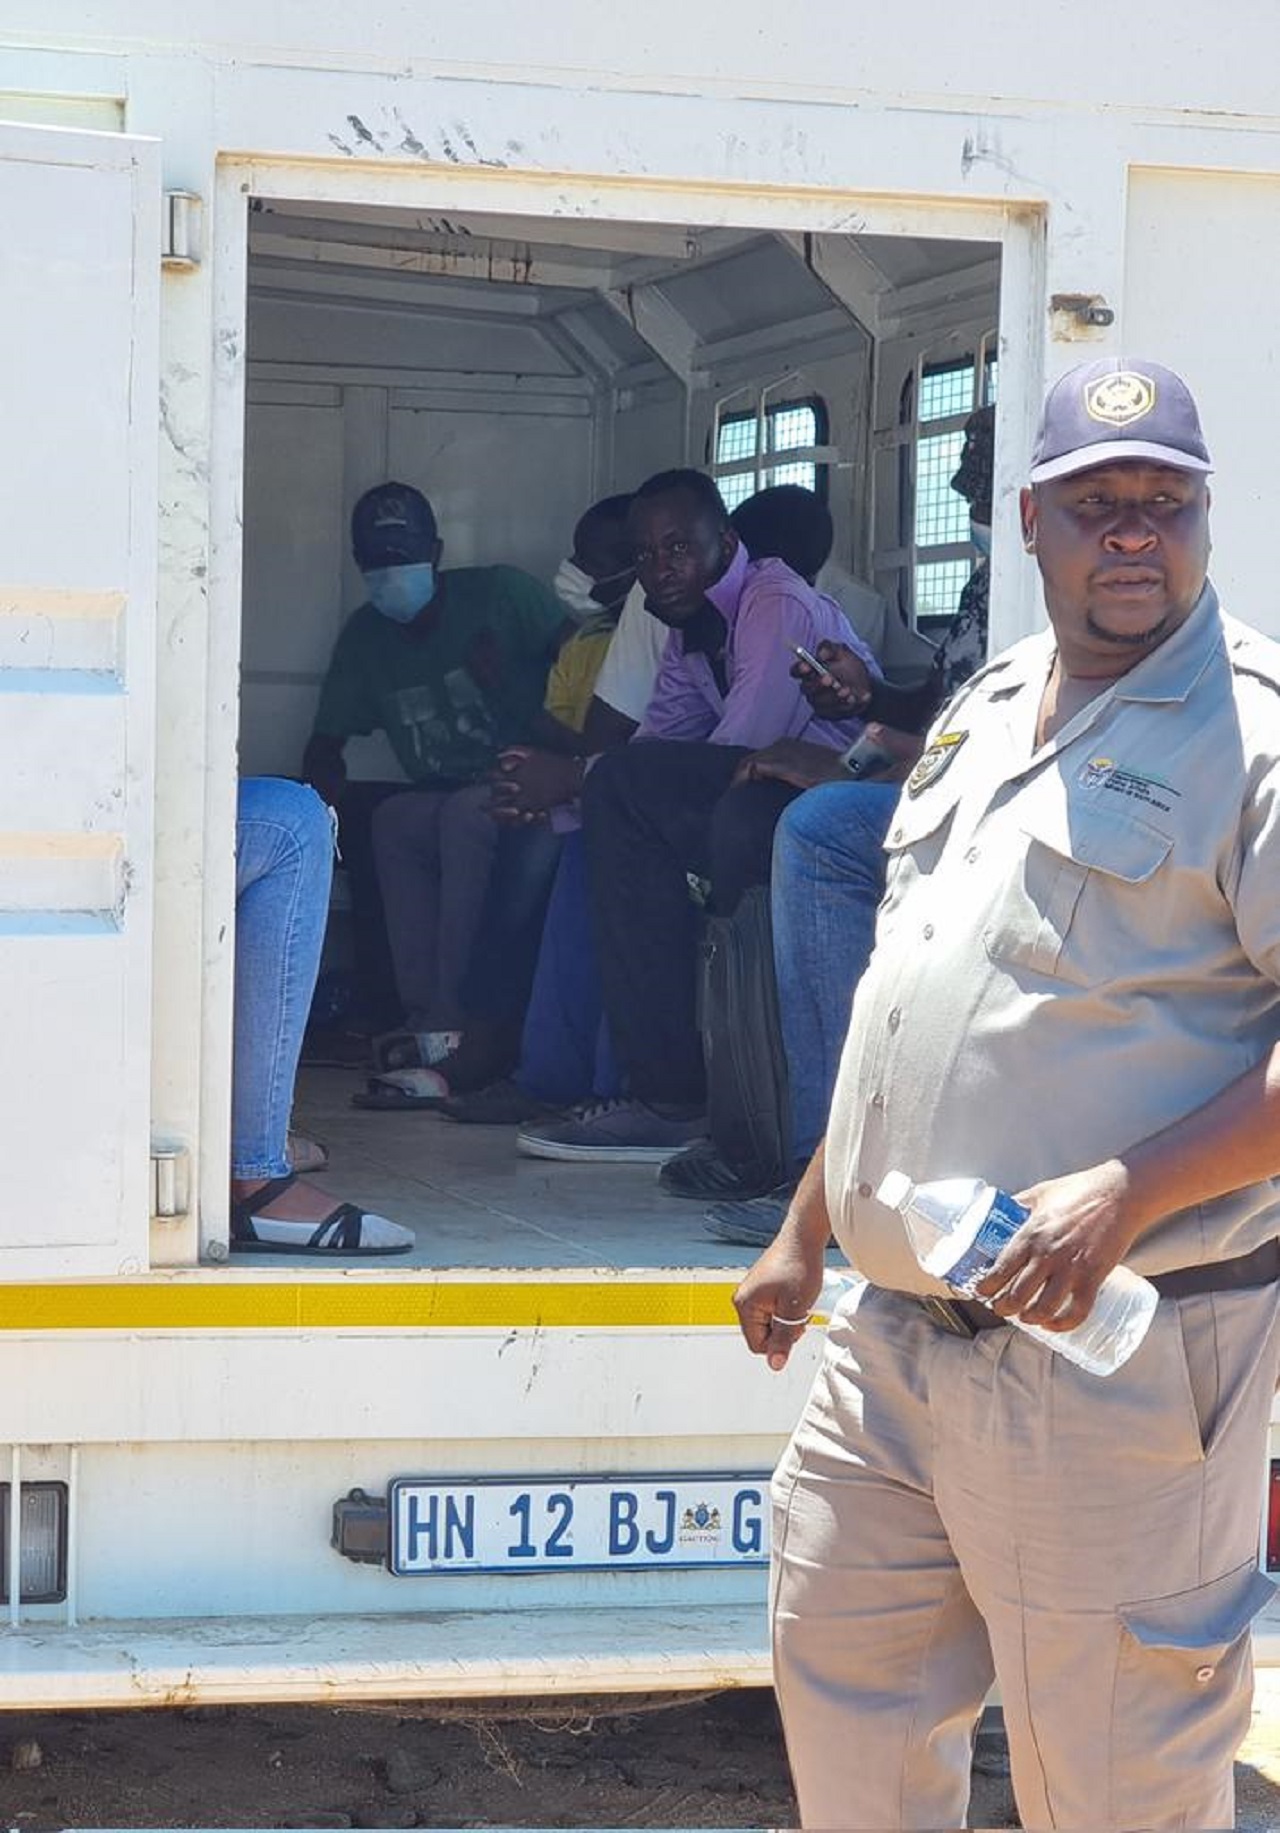 Zimbabwean Cross-border Buses Boast On Finding Alternative Routes Into South Africa